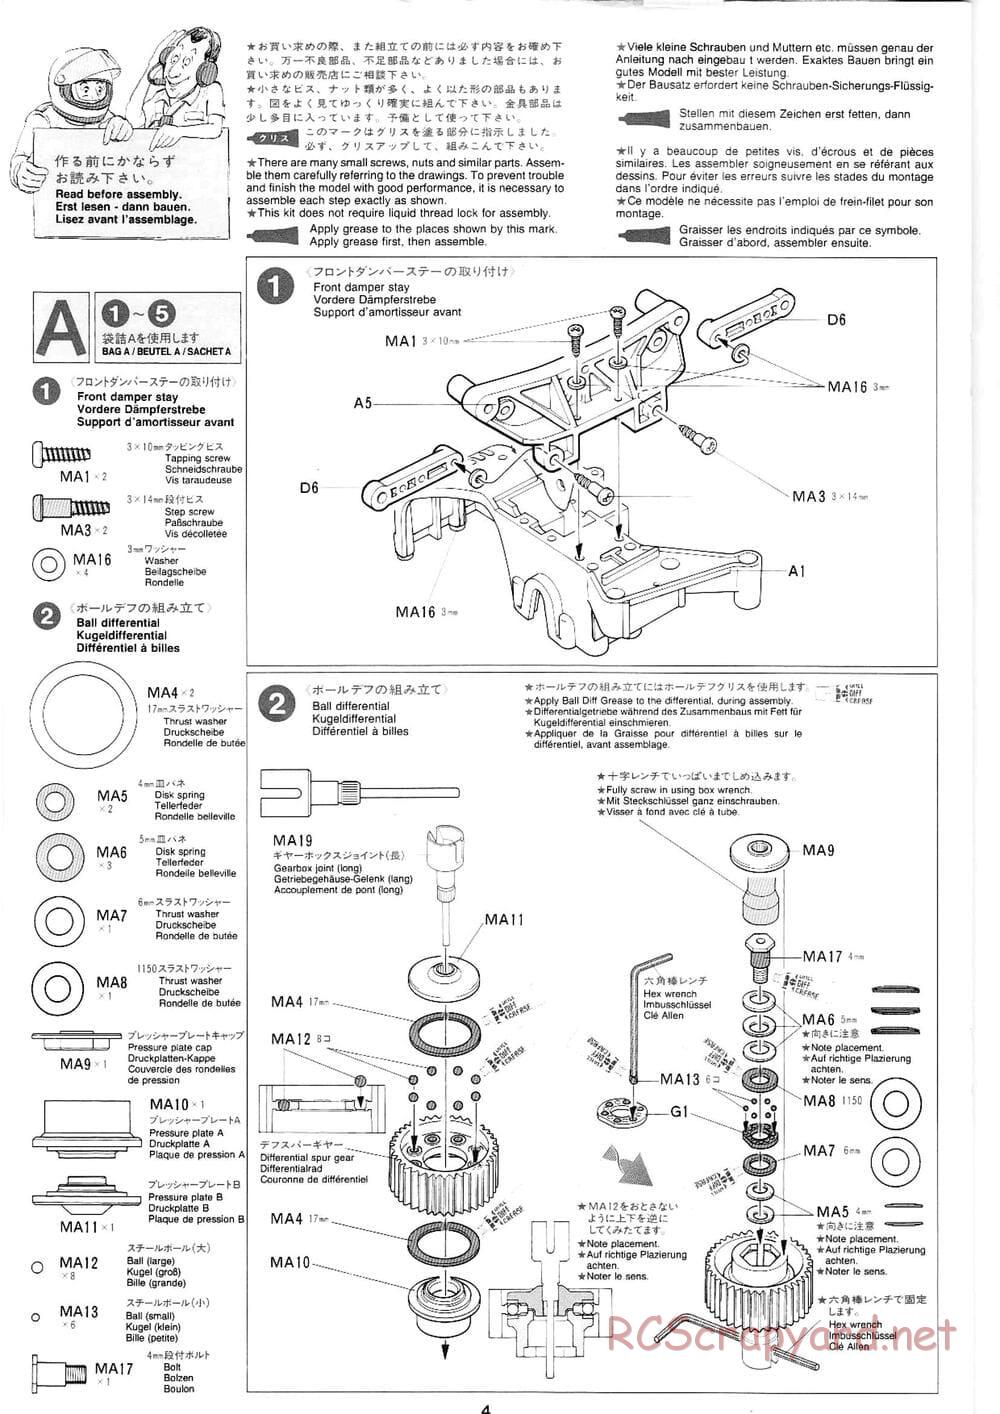 Tamiya - Volkswagen New Beetle - FF-01 Chassis - Manual - Page 2